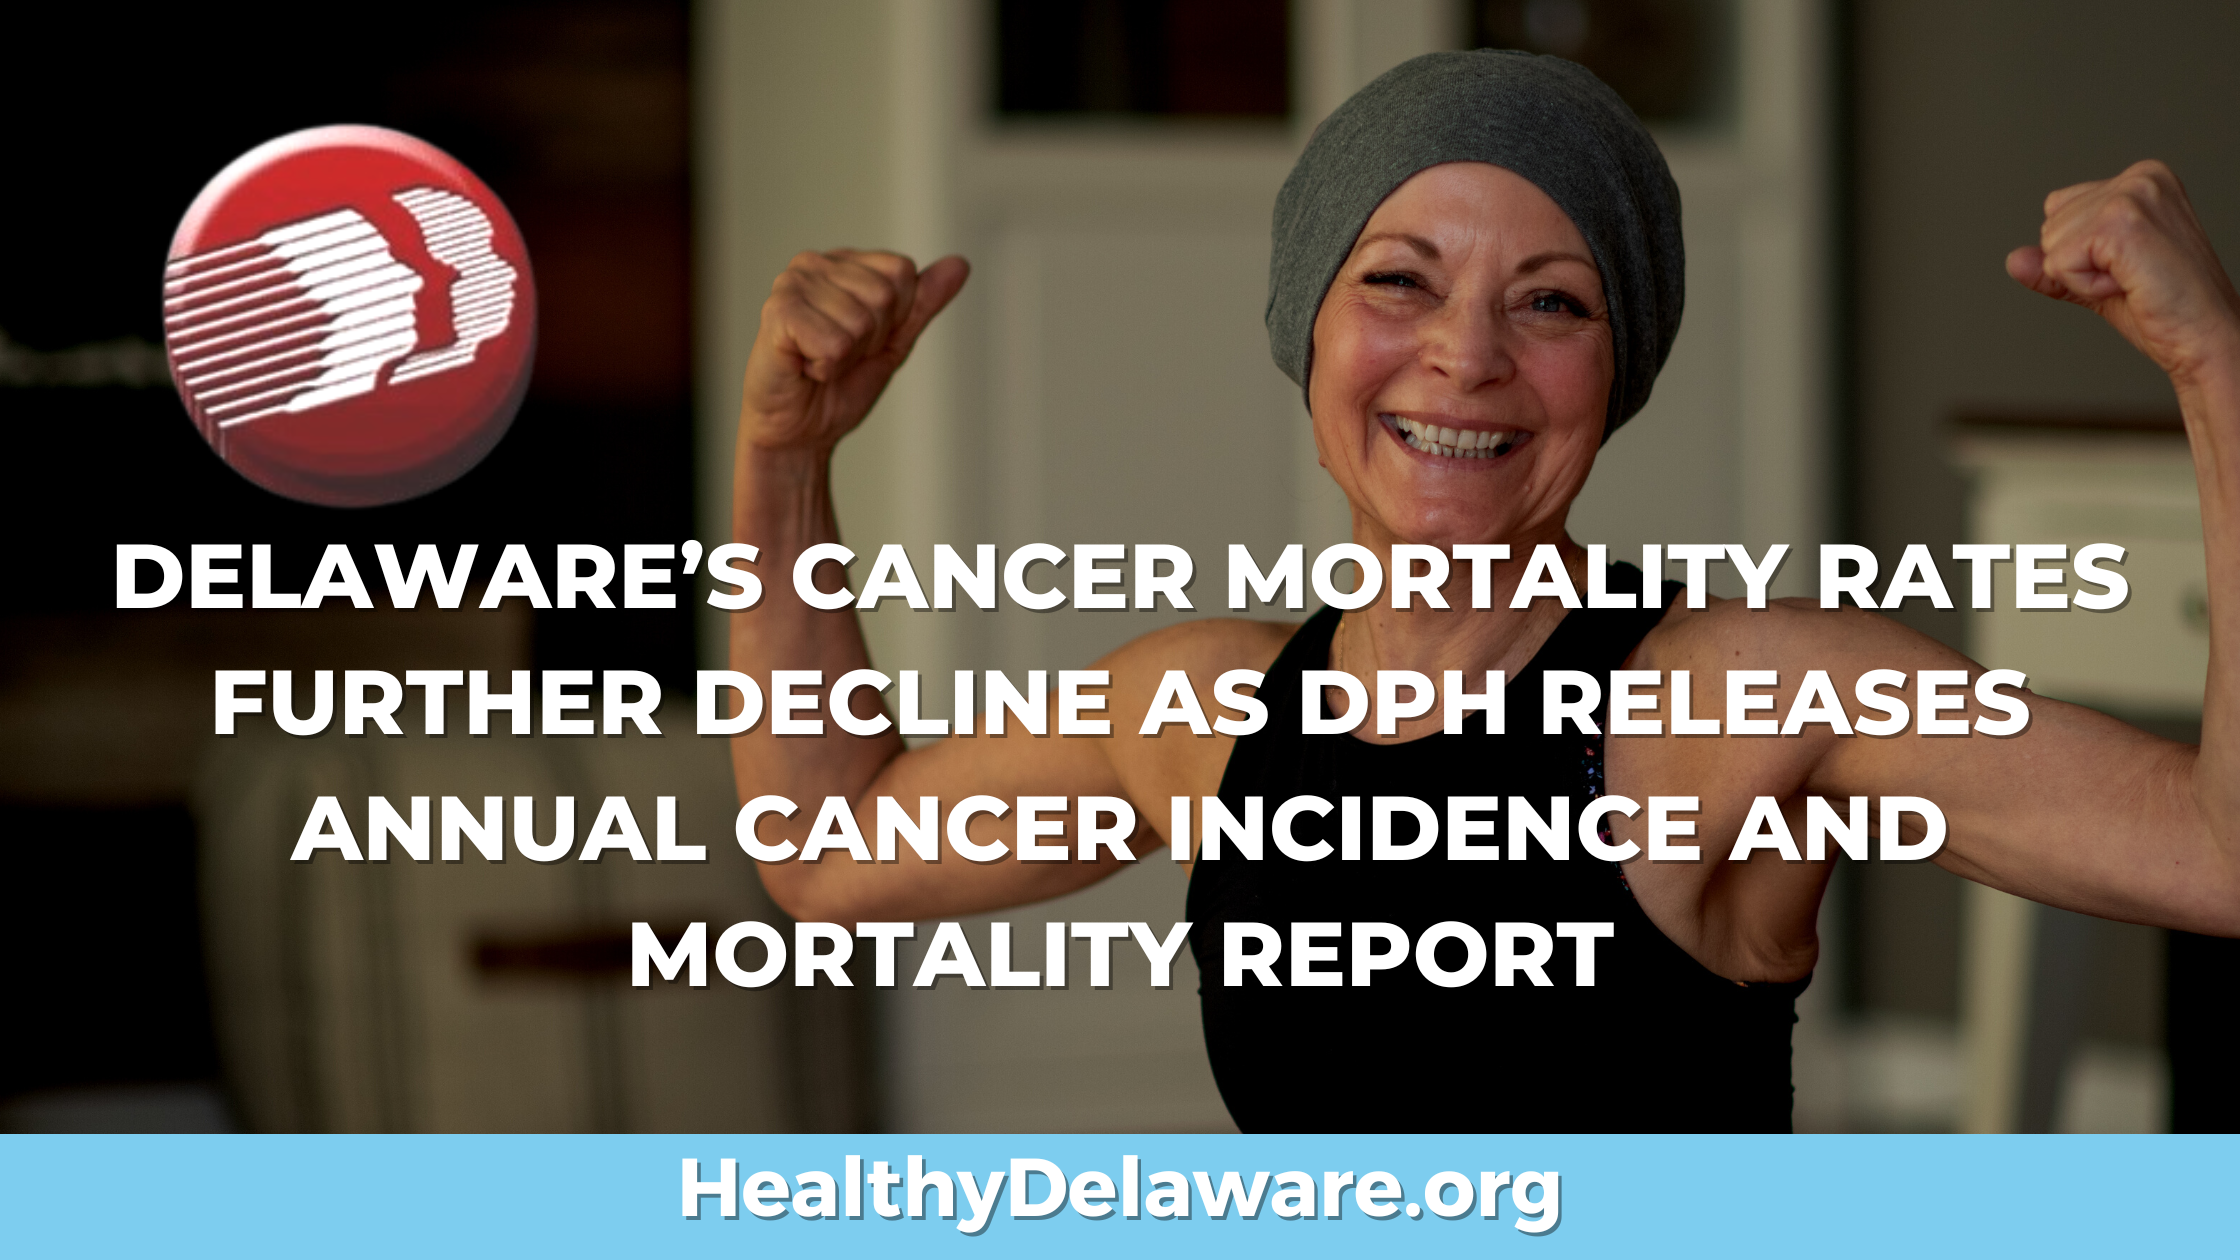 Delaware’s Cancer Mortality Rates Further Decline As DPH Releases Annual Cancer Incidence And Mortality Report